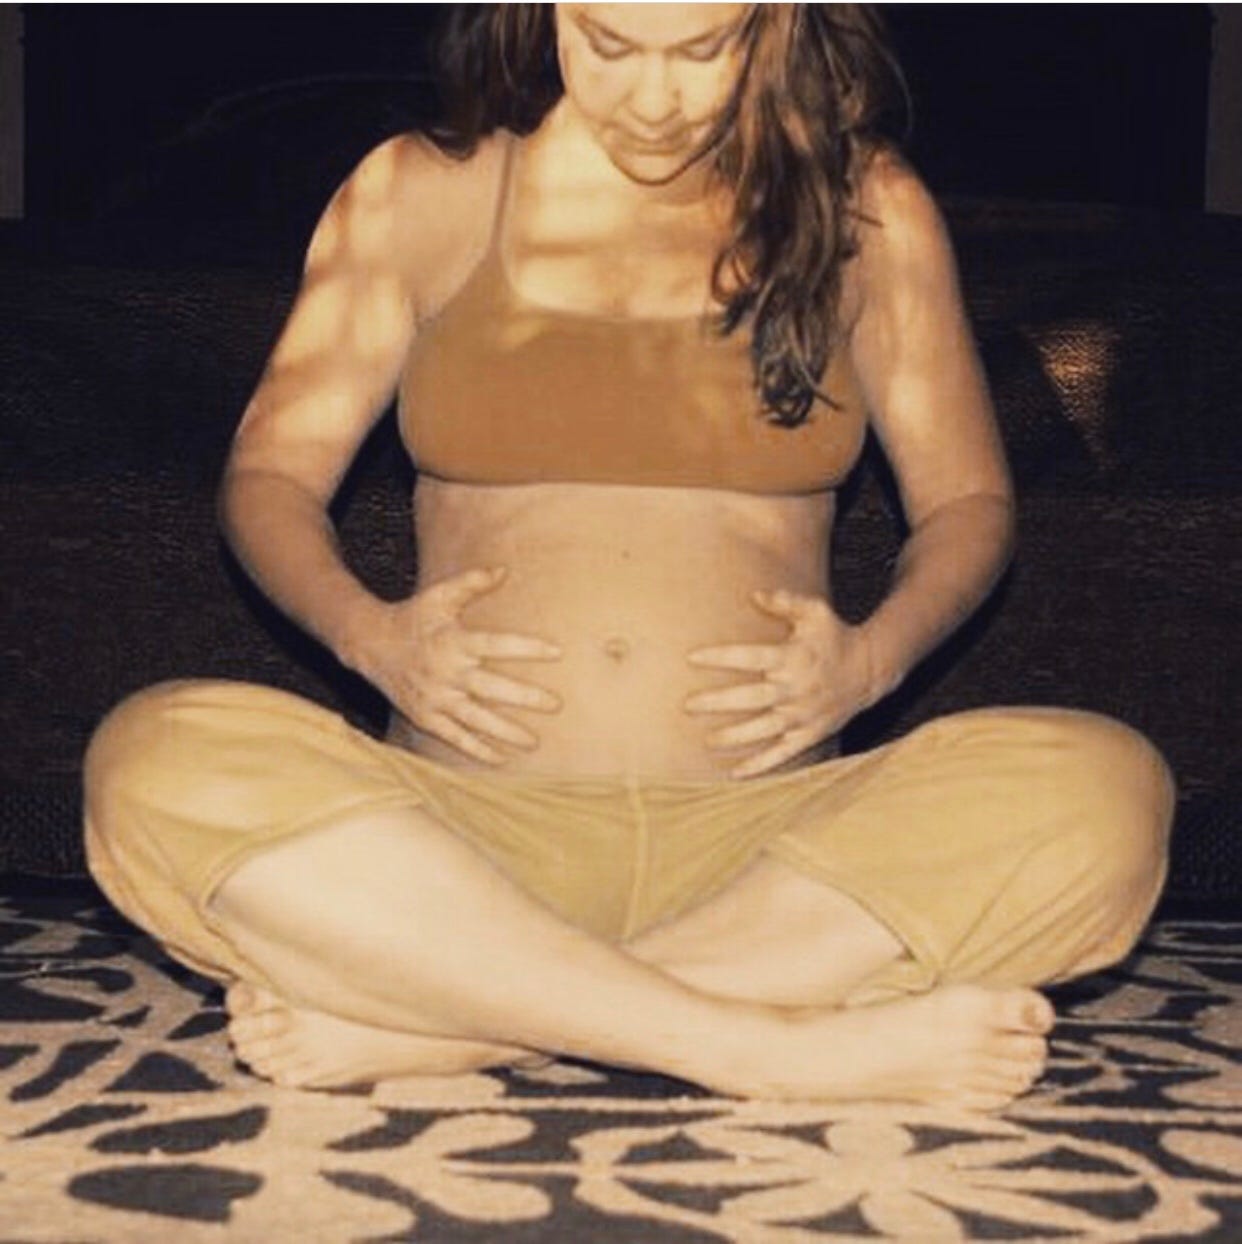 A pregnant woman doing prenatal yoga, concerned about weight gain in pregnancy.